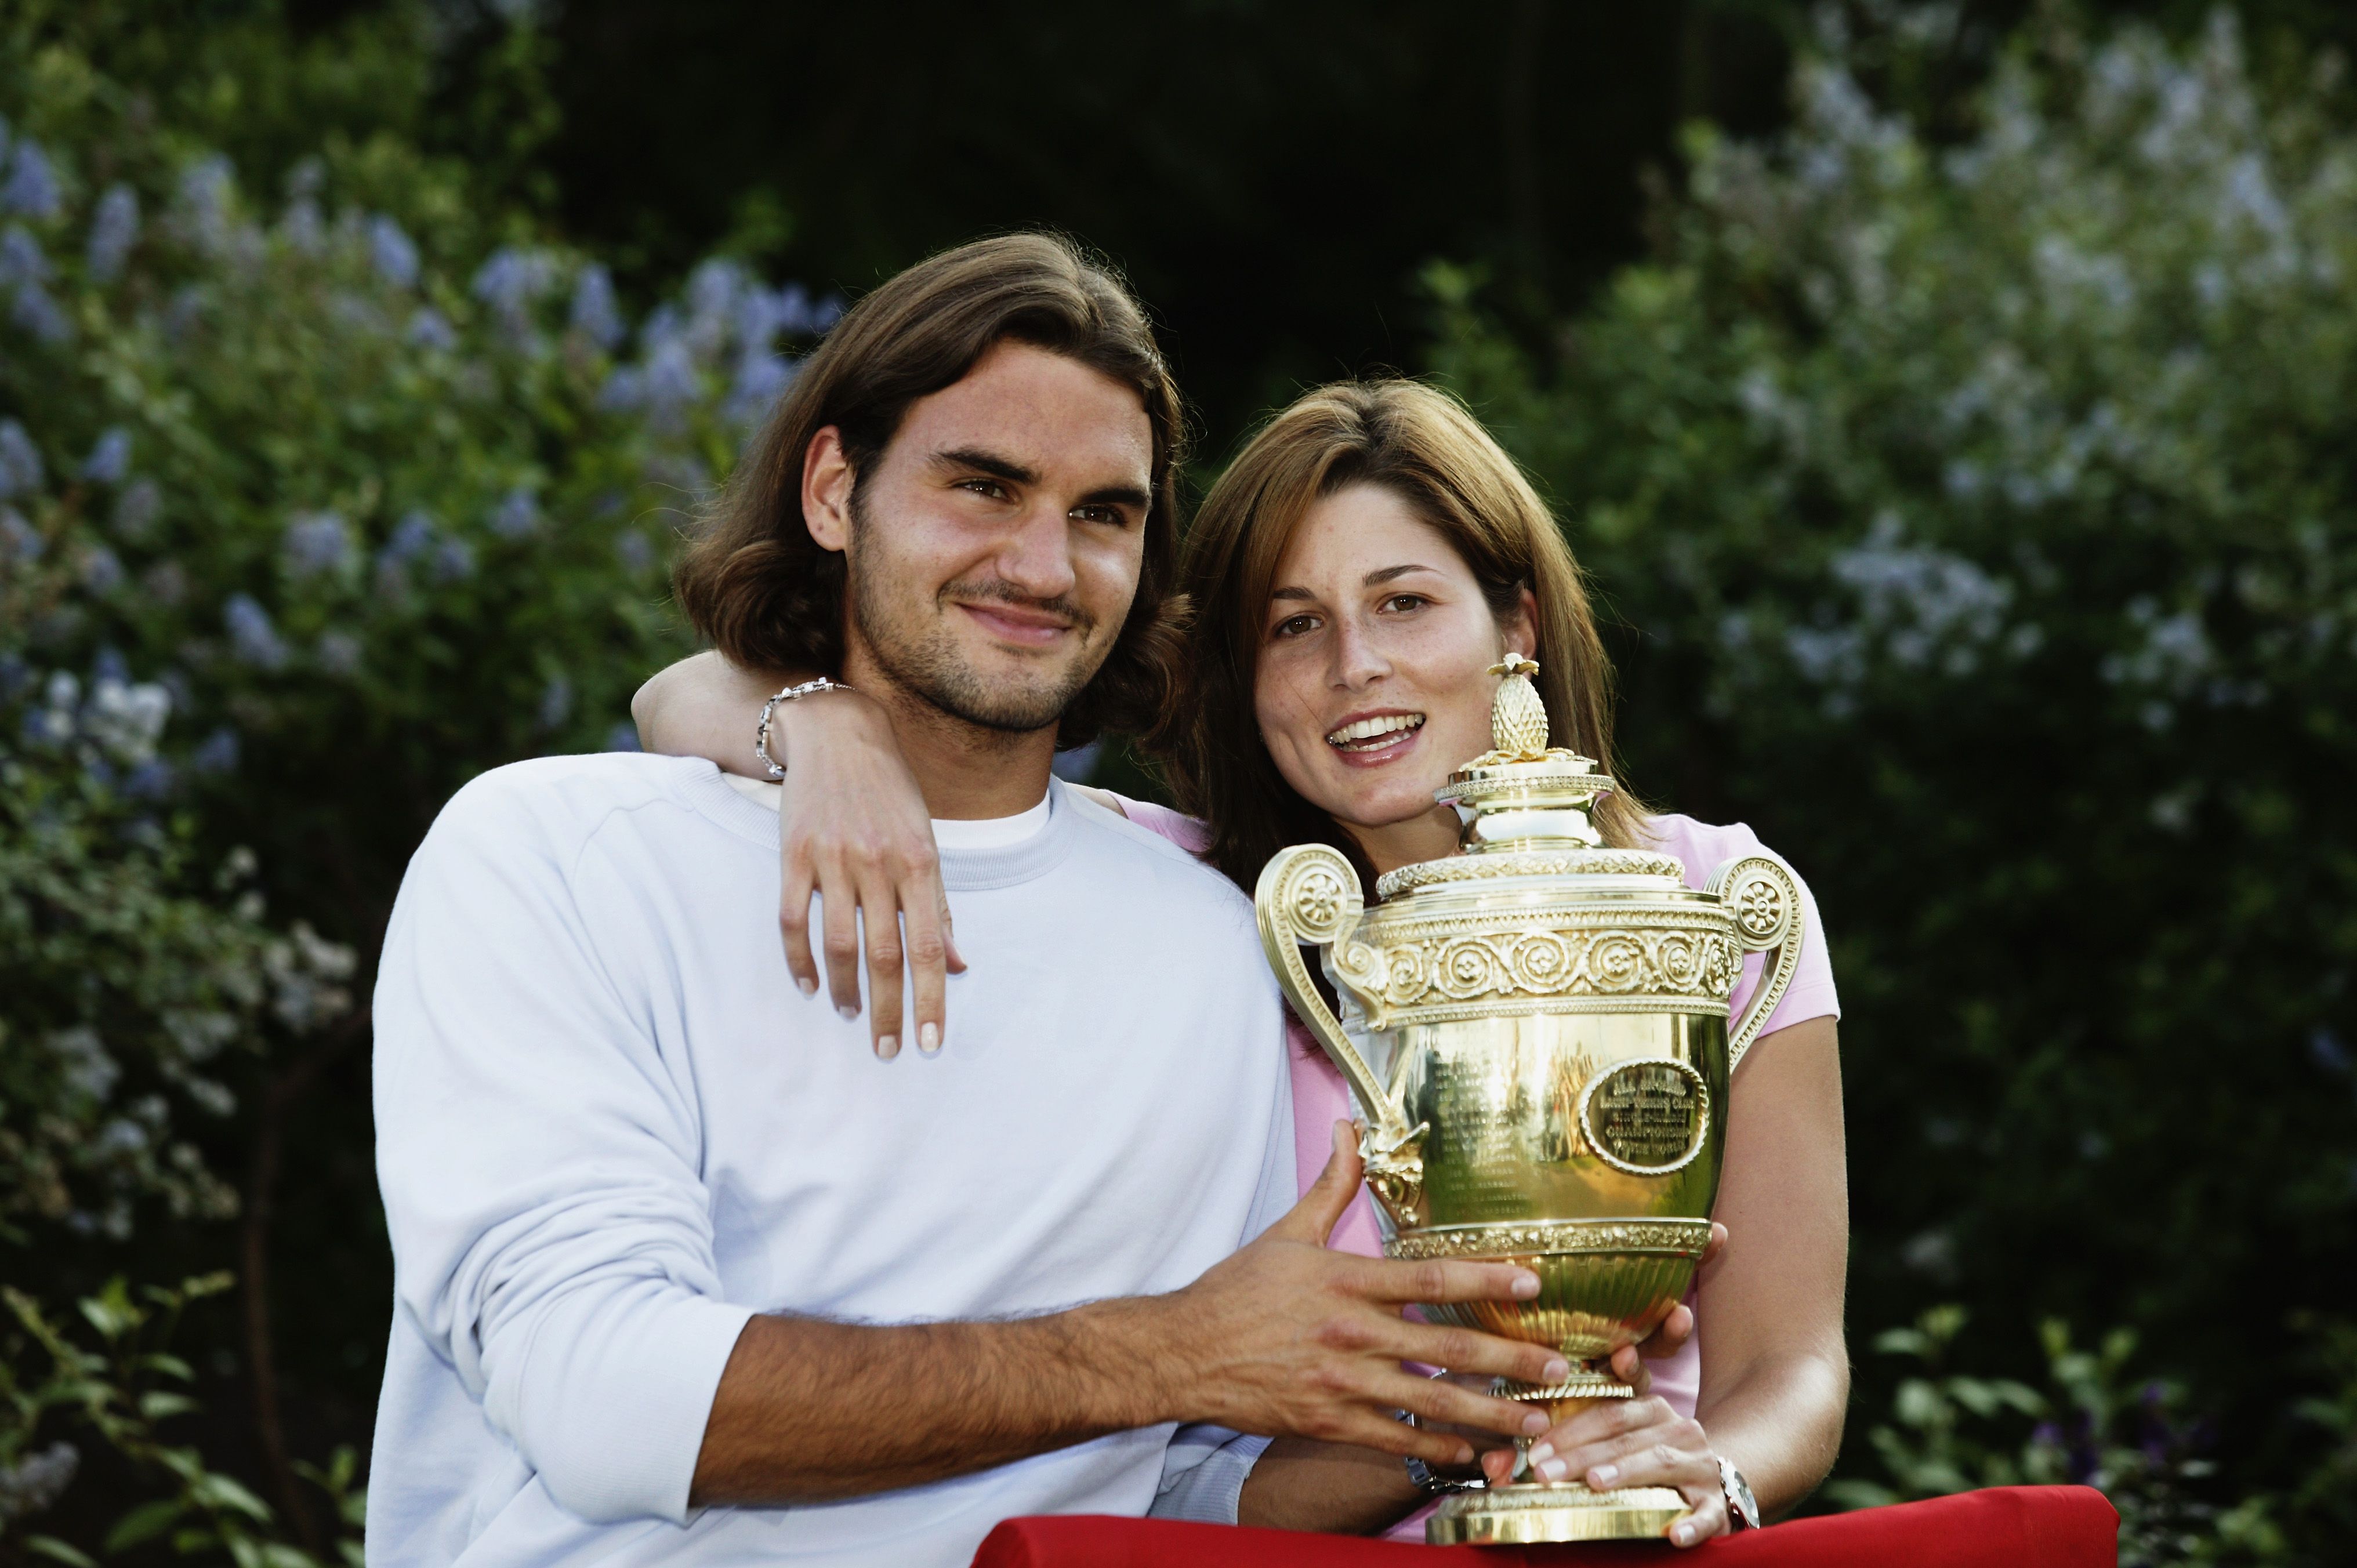 Mirka Federer Is Roger Federer's Wife and Mother of Their 4 Kids — inside the Tennis Star's Family